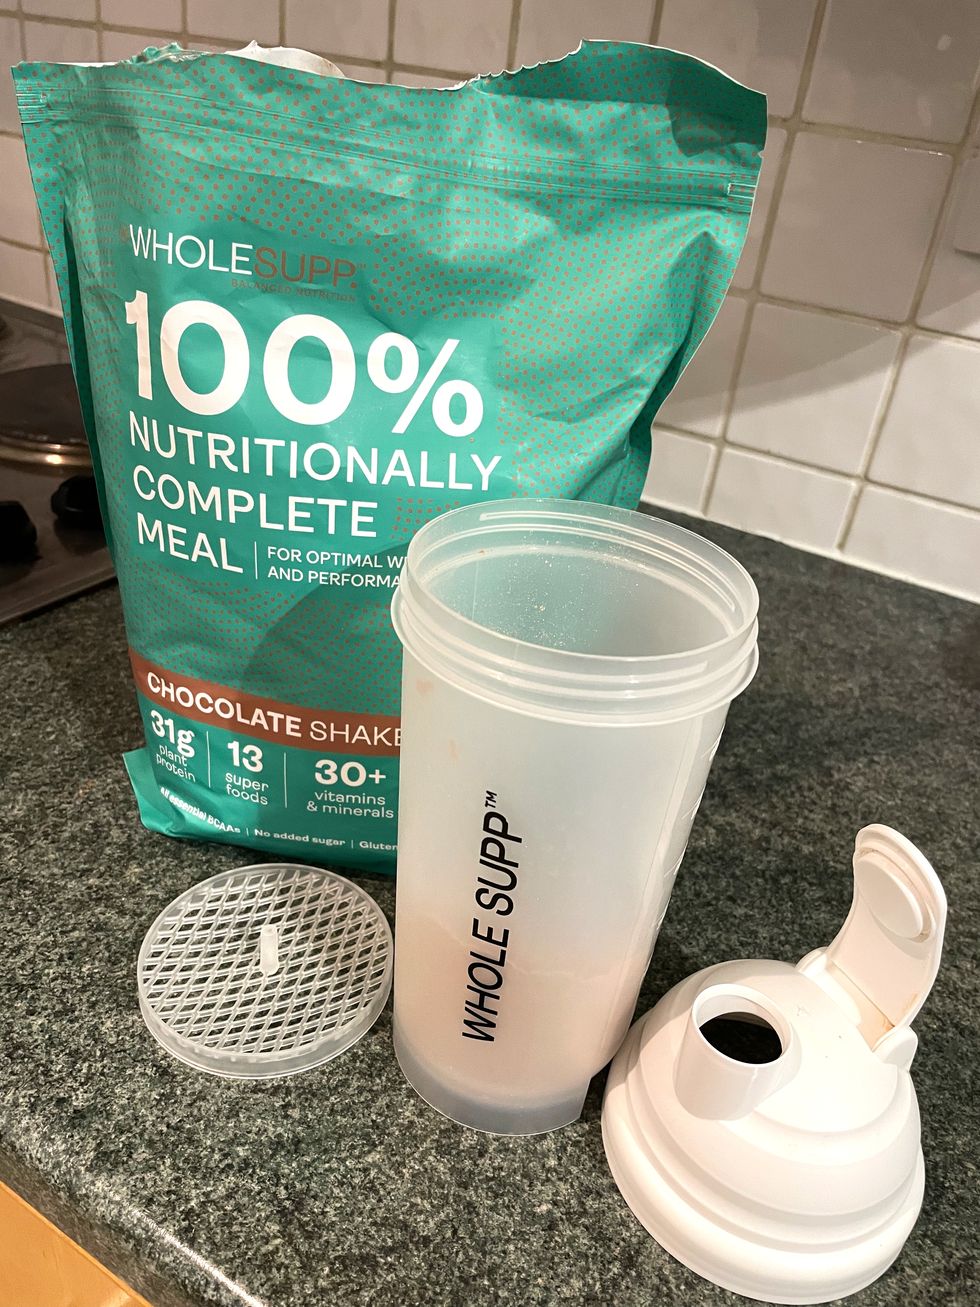 whole supp meal replacement shake